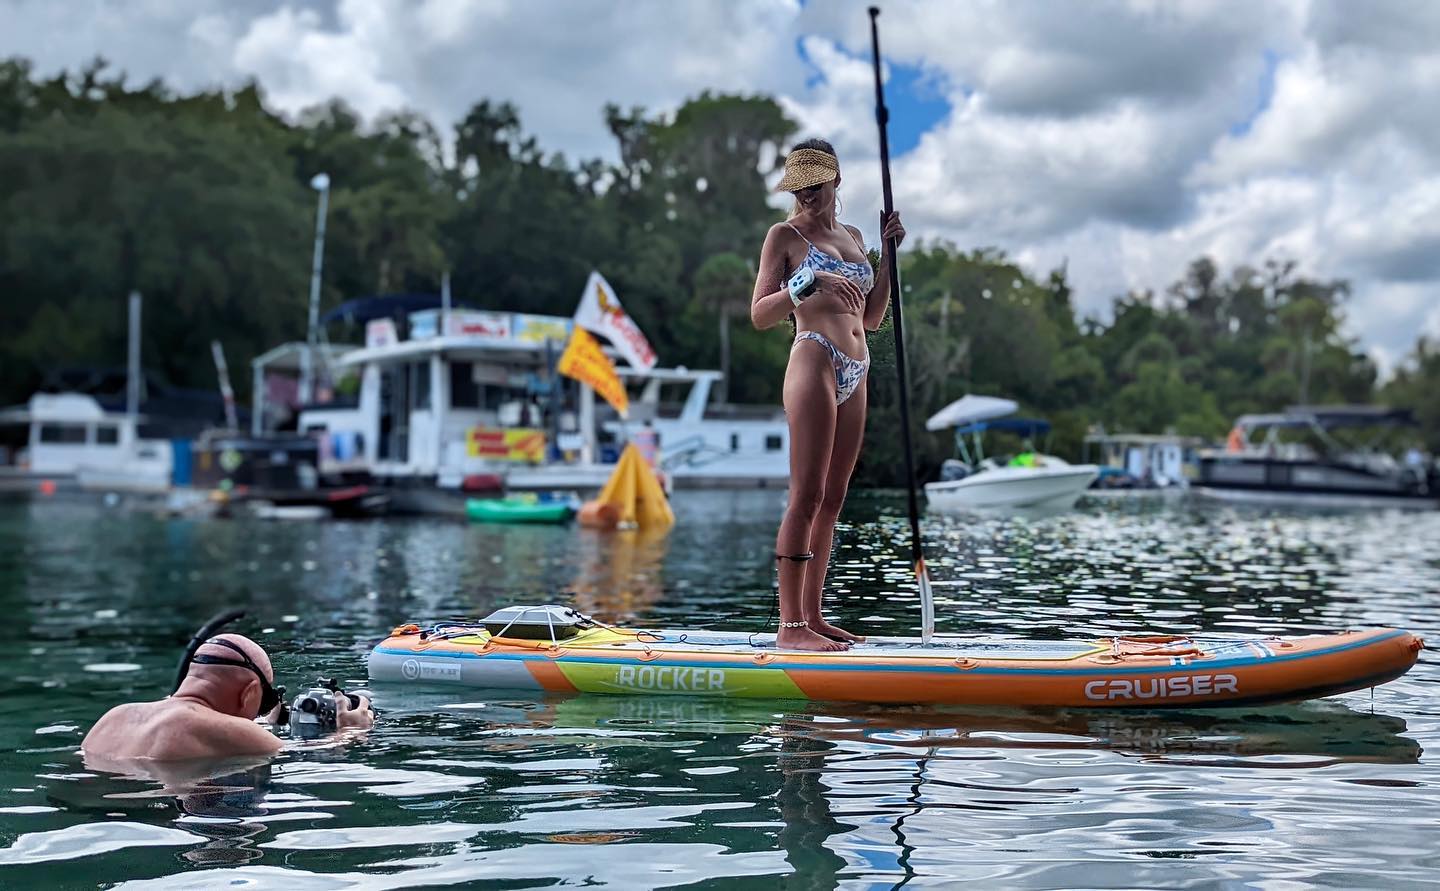 man takes photo of woman on paddleboard with Bixpy motor